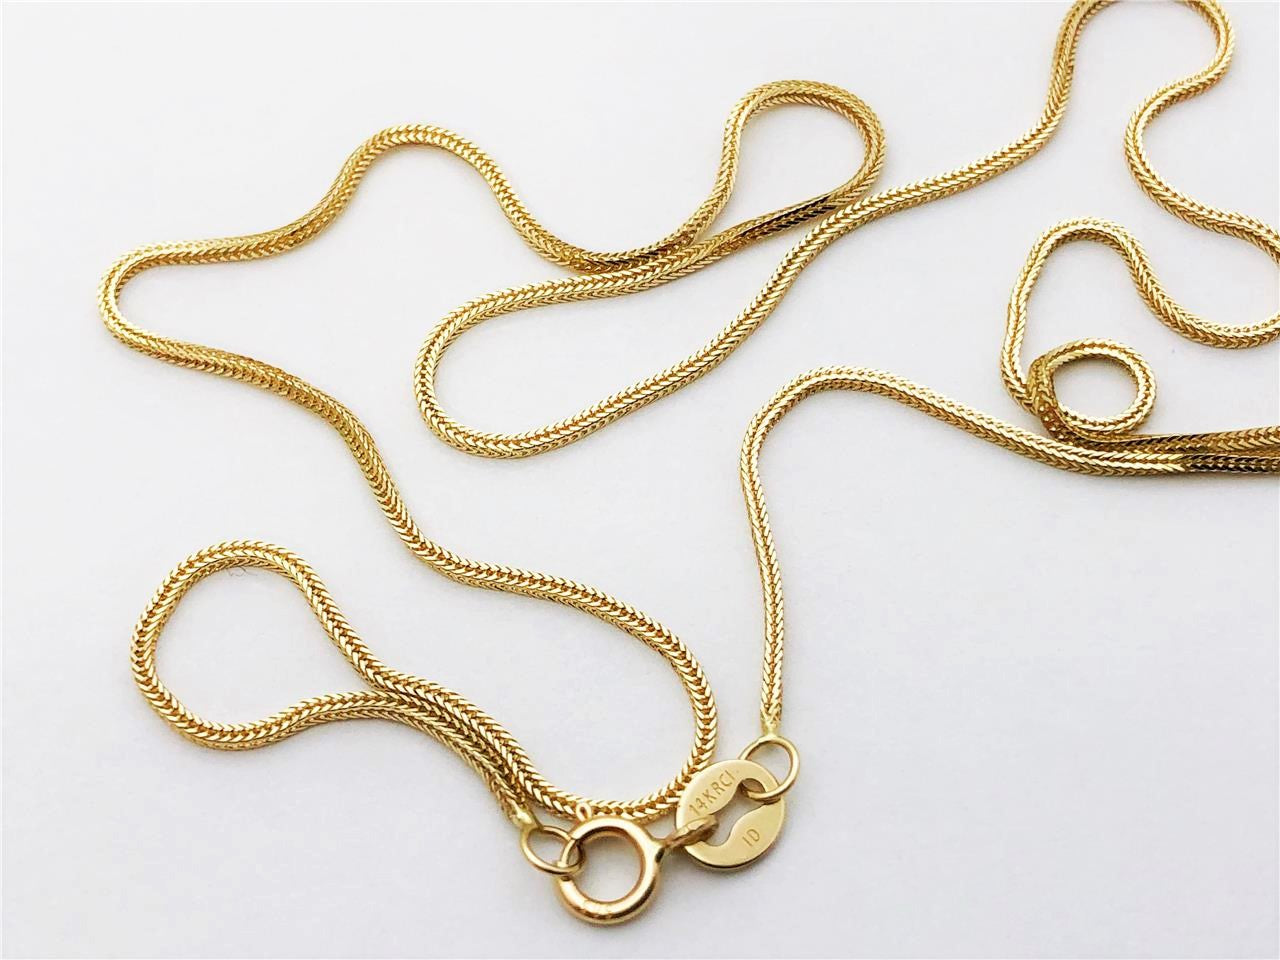 Brass Gold Plated Round Foxtail Chain, Size: 24(l) X 0.5(w) Inches at best  price in Coimbatore